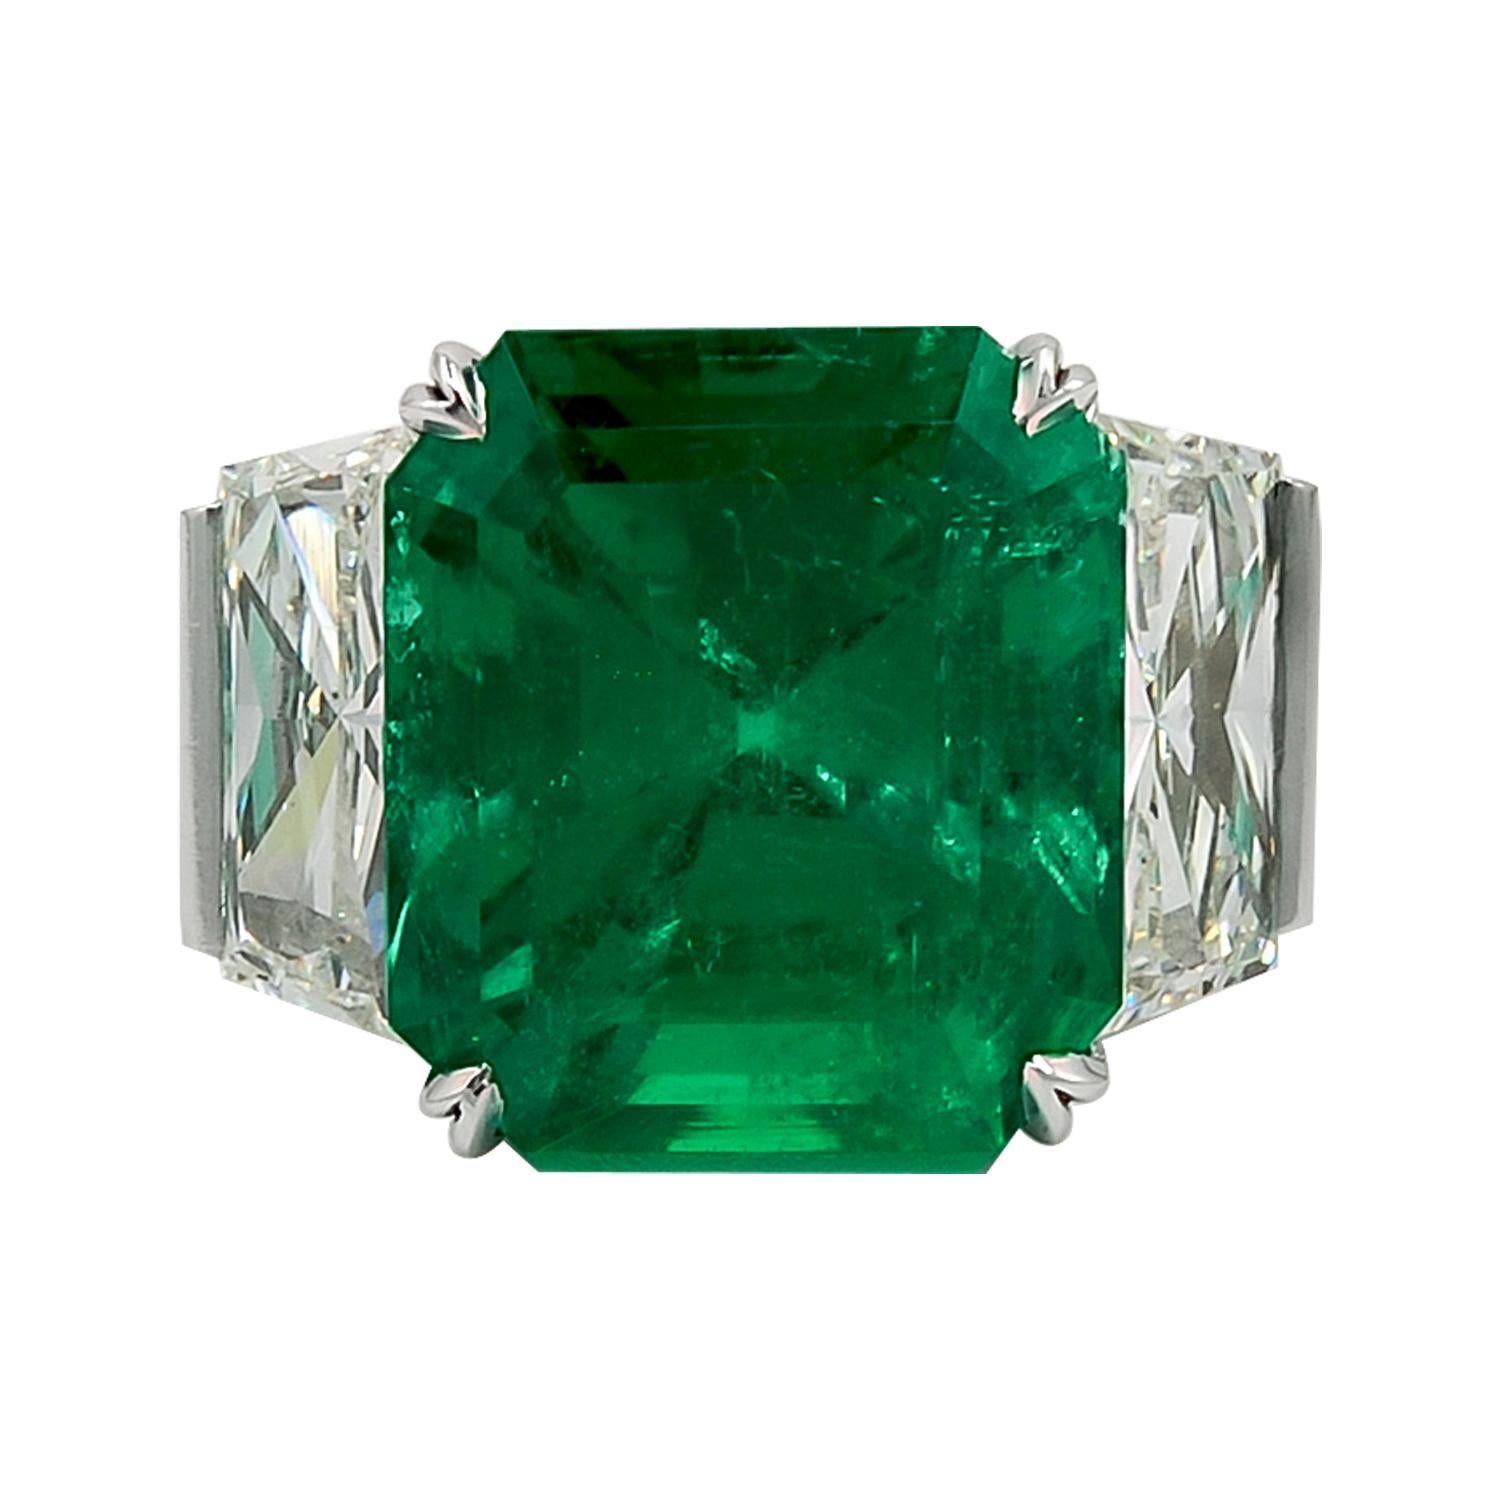 Very Fine Colombian 16.97 Carat Emerald With SSEF Certificate Diamond Ring For Sale